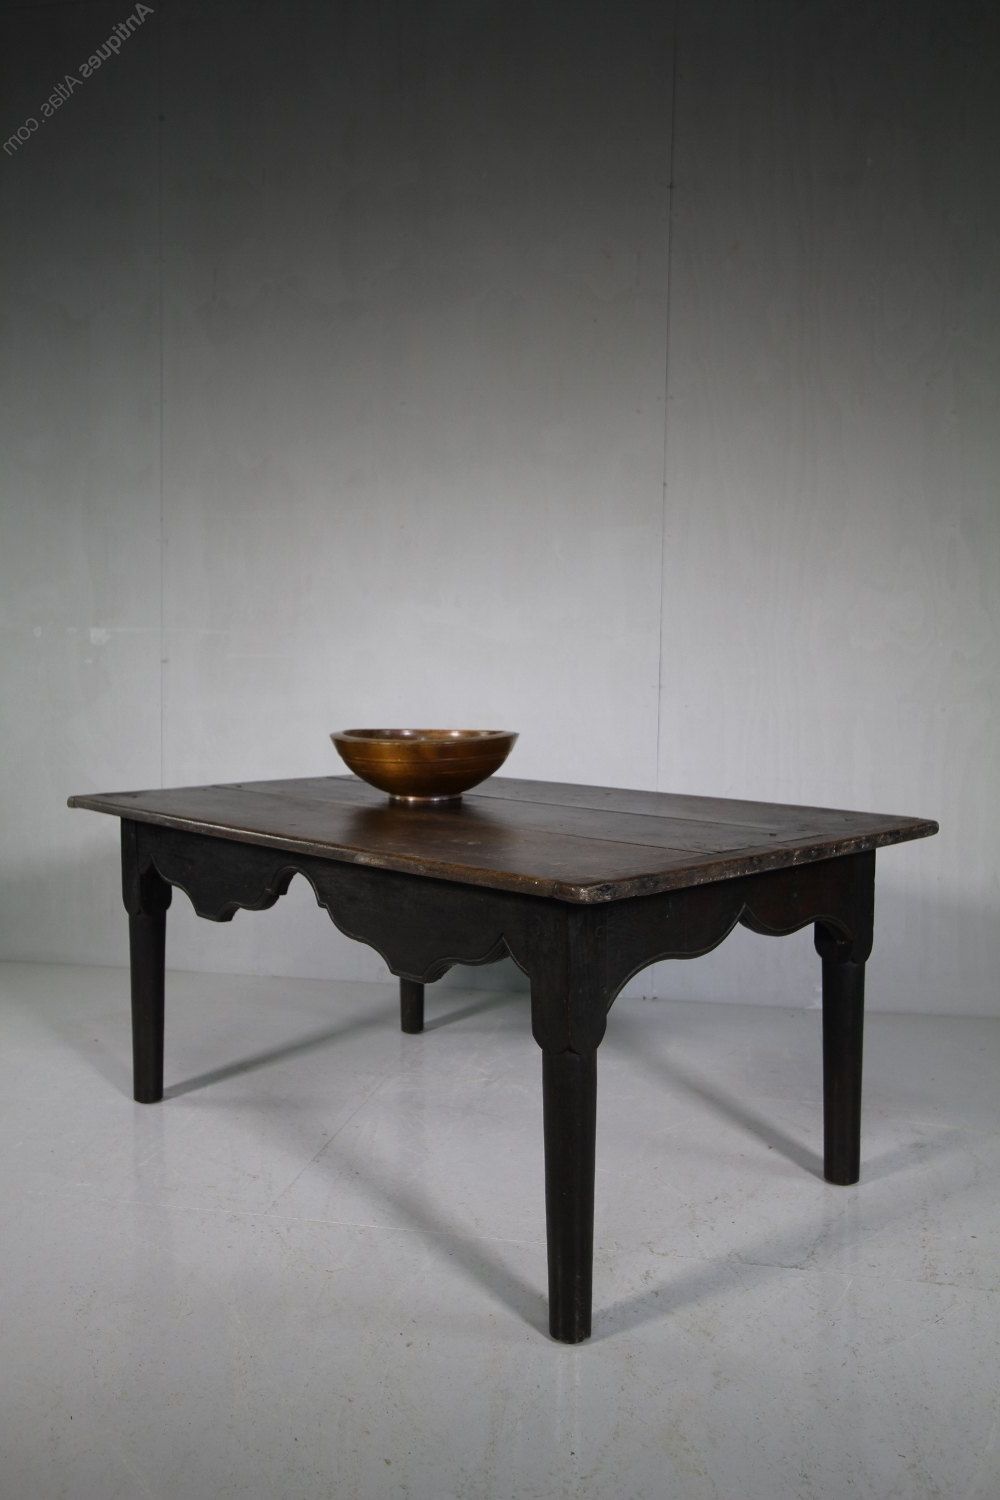 2019 Vintage Gray Oak Coffee Tables With Regard To Early 18th Century Antique Oak Low Coffee Table (View 12 of 20)